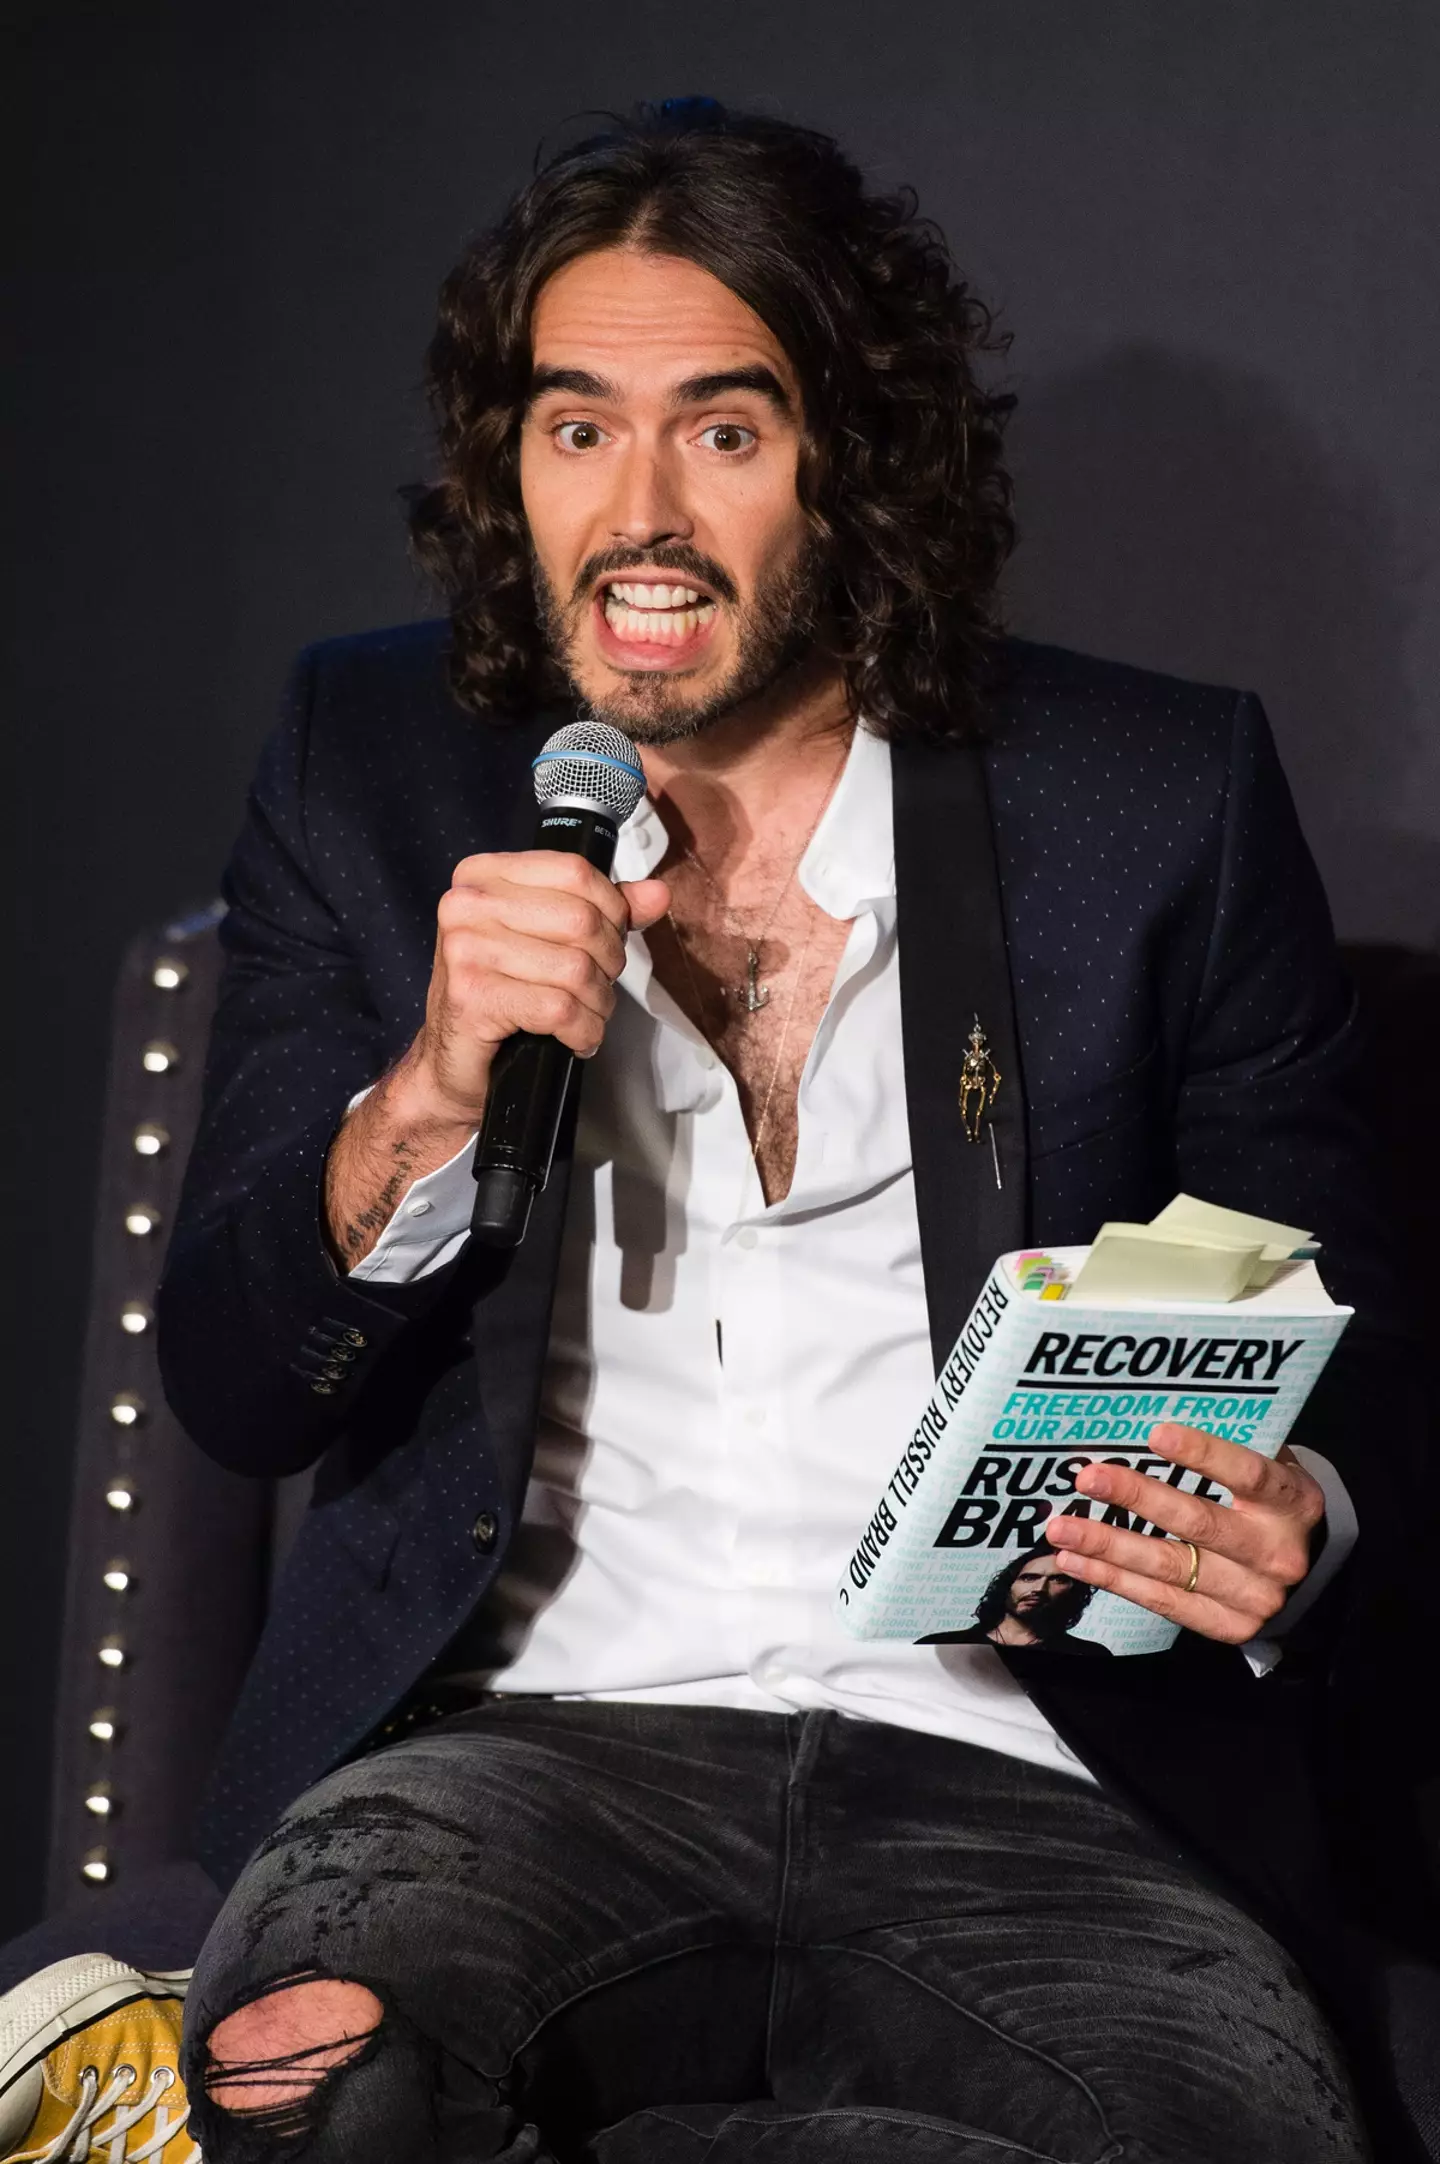 Russell Brand has denied the accusations made against him.